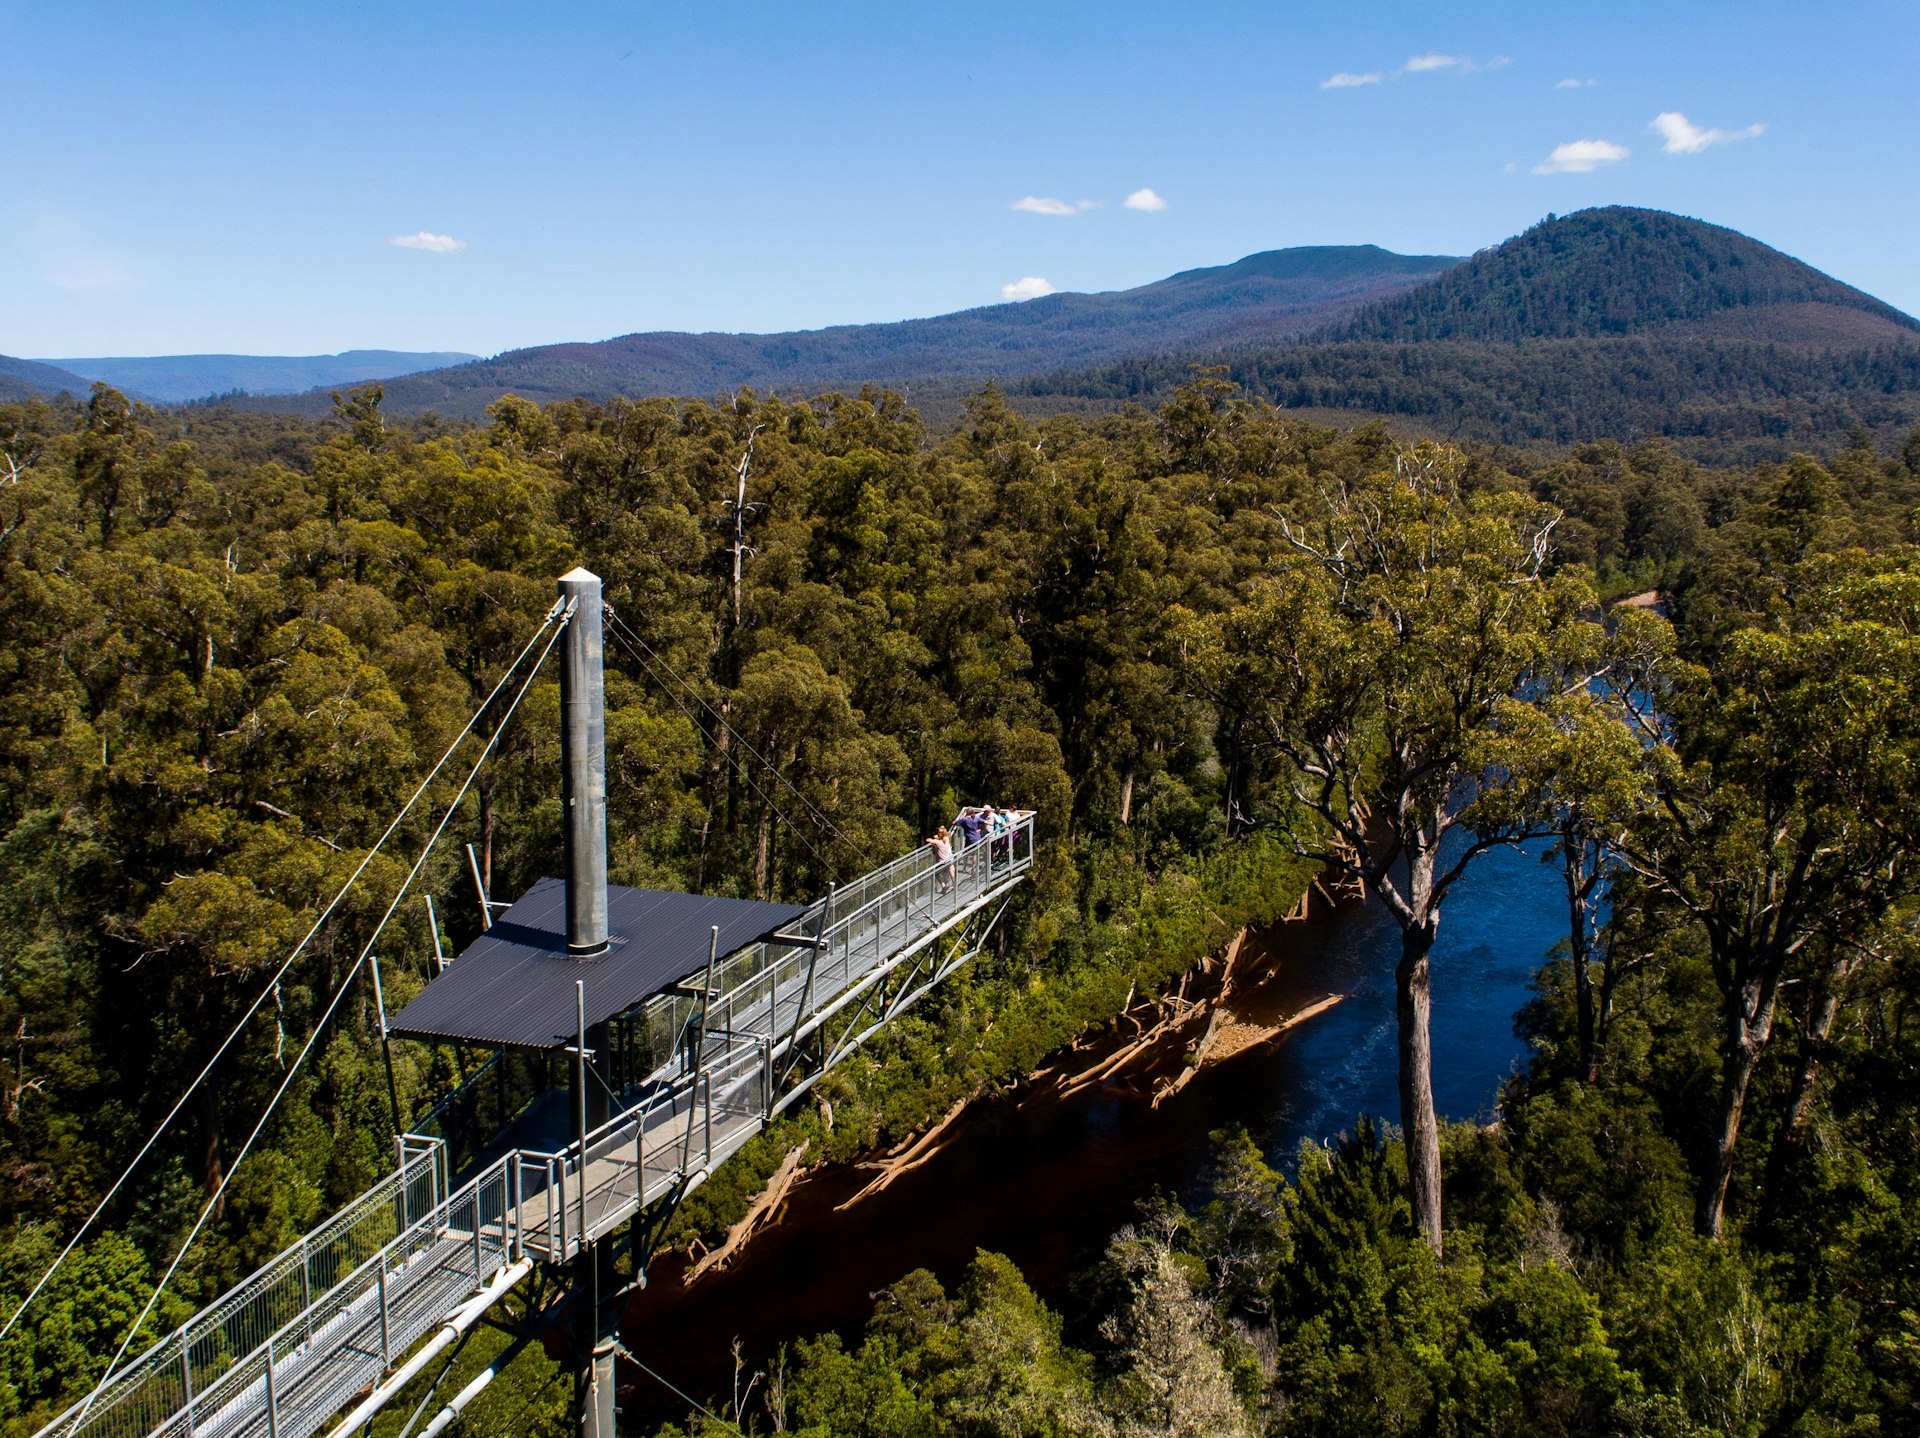 Shot from above, the image looks down on a metal walkway that cantilevers over a section of river; the whole scene is dominated by the forest, which extends into the distant hills.